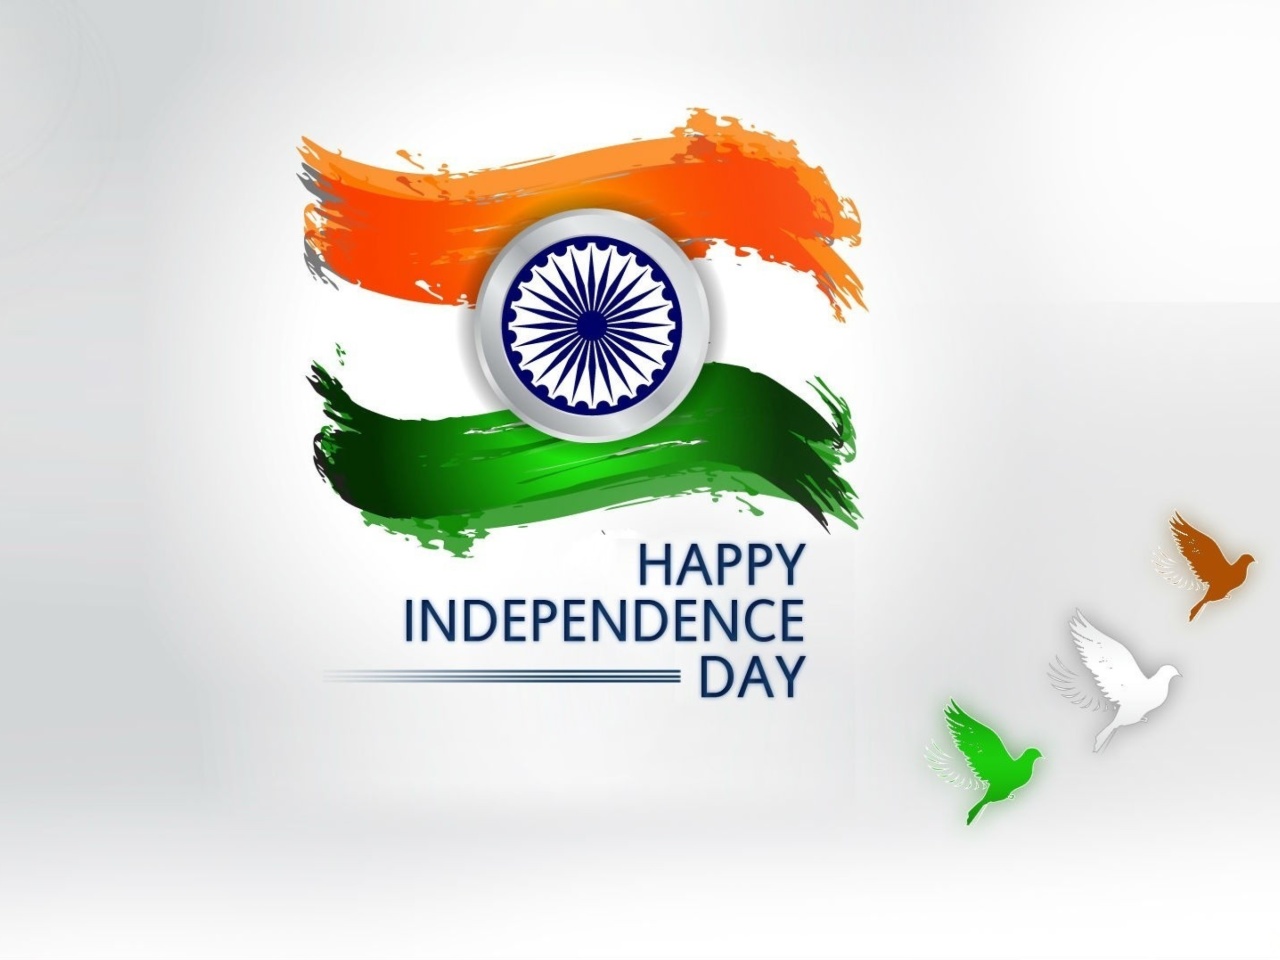 Independence Day India wallpaper 1280x960